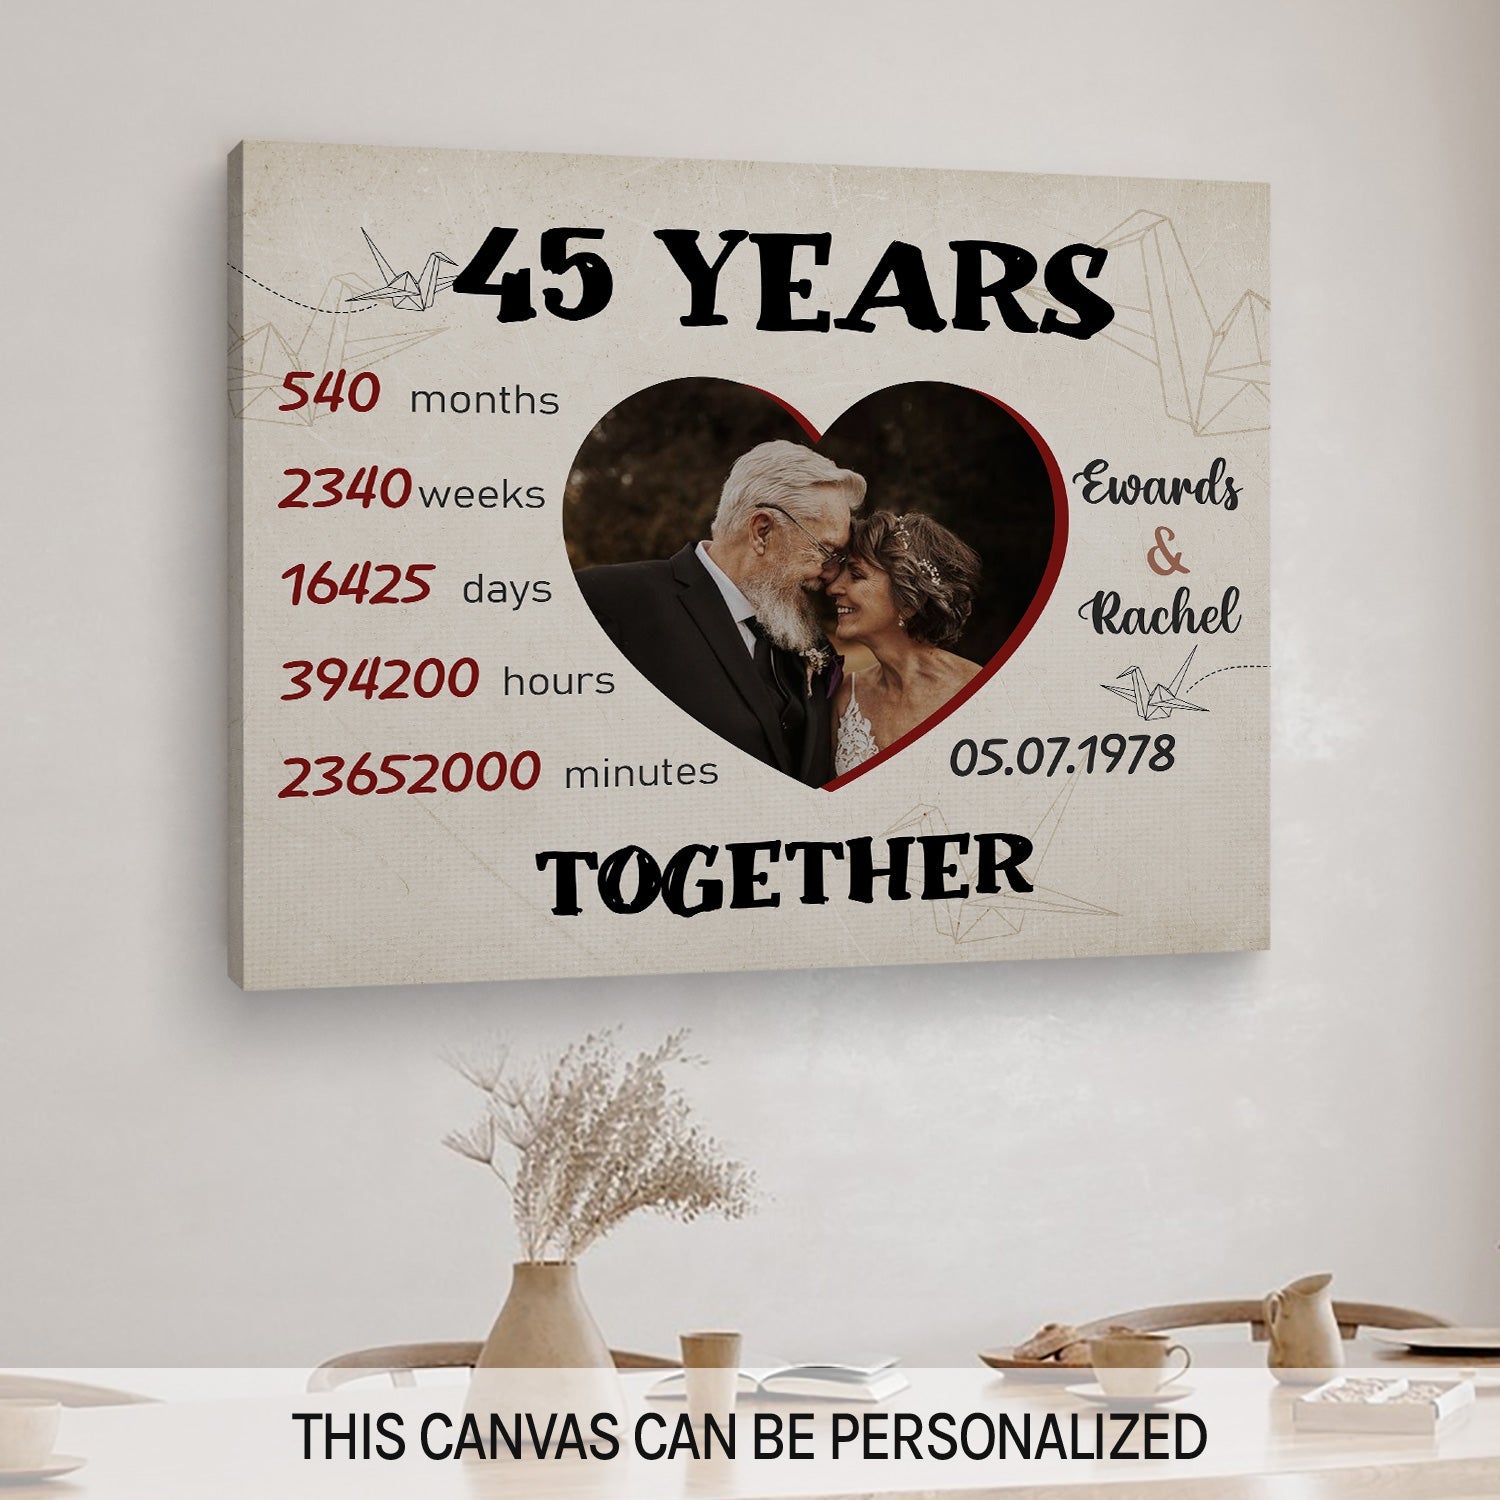 45 Years Together - Personalized 45 Year Anniversary gift for Husband or Wife - Custom Canvas - MyMindfulGifts